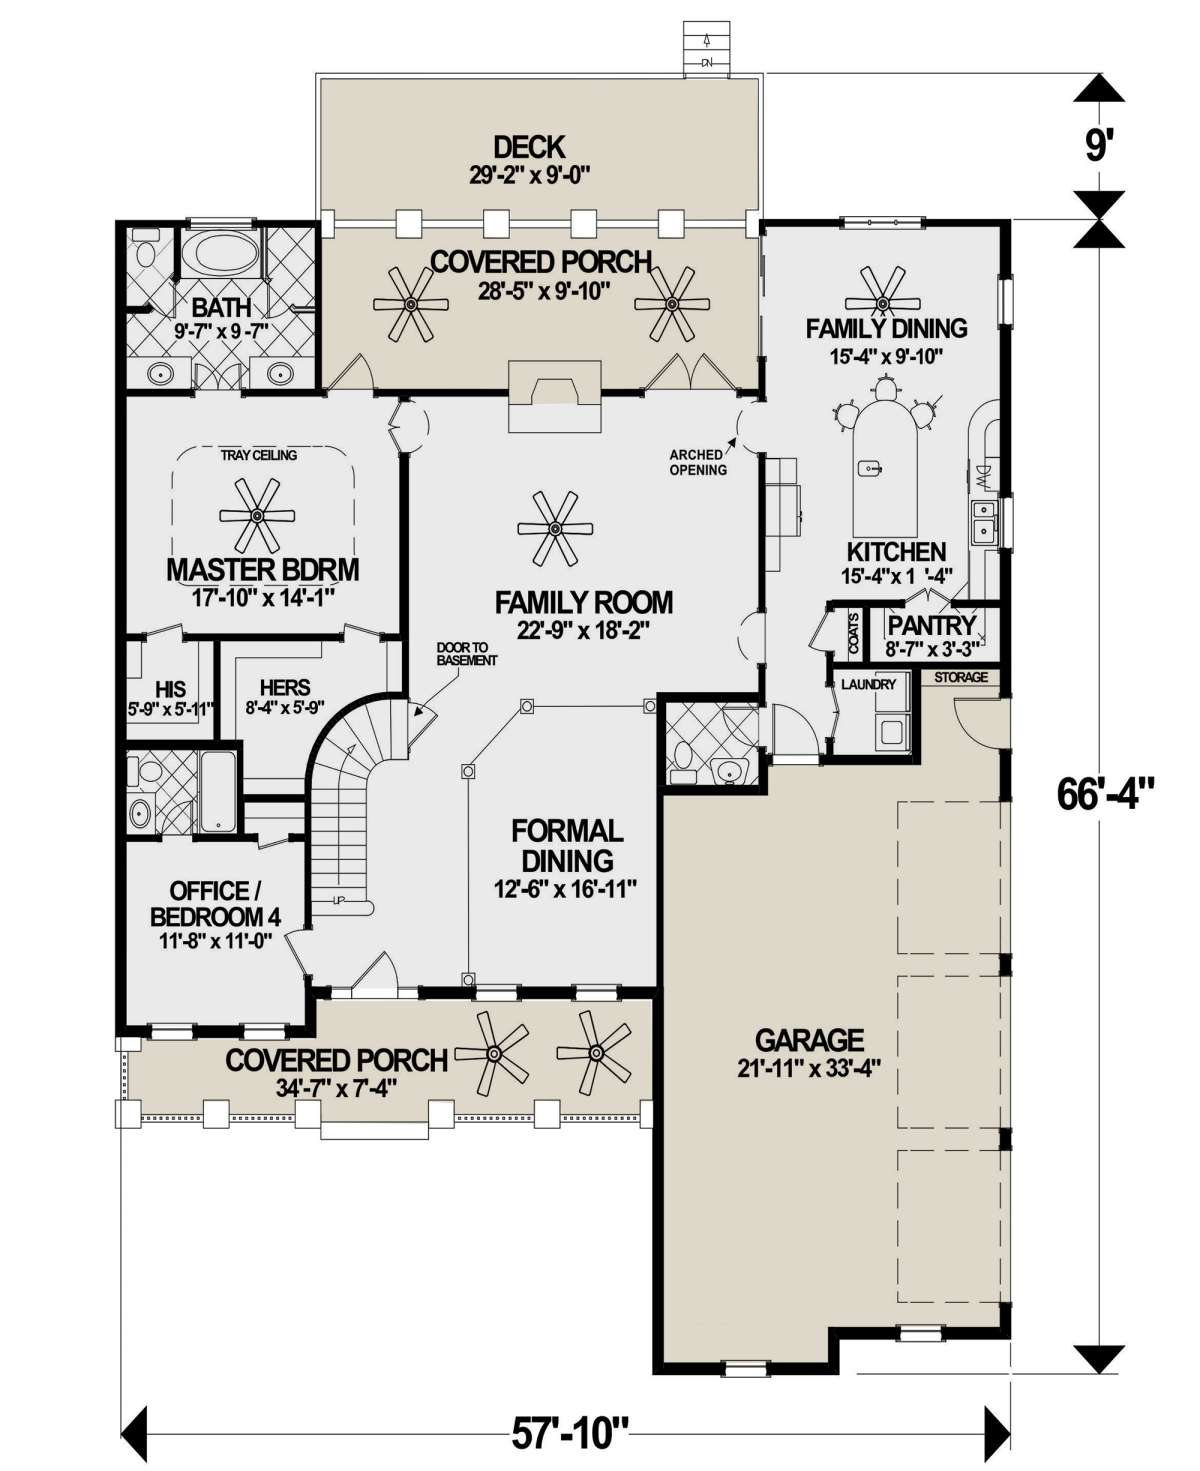 Country Plan: 2,799 Square Feet, 4 Bedrooms, 4.5 Bathrooms - 036-00265